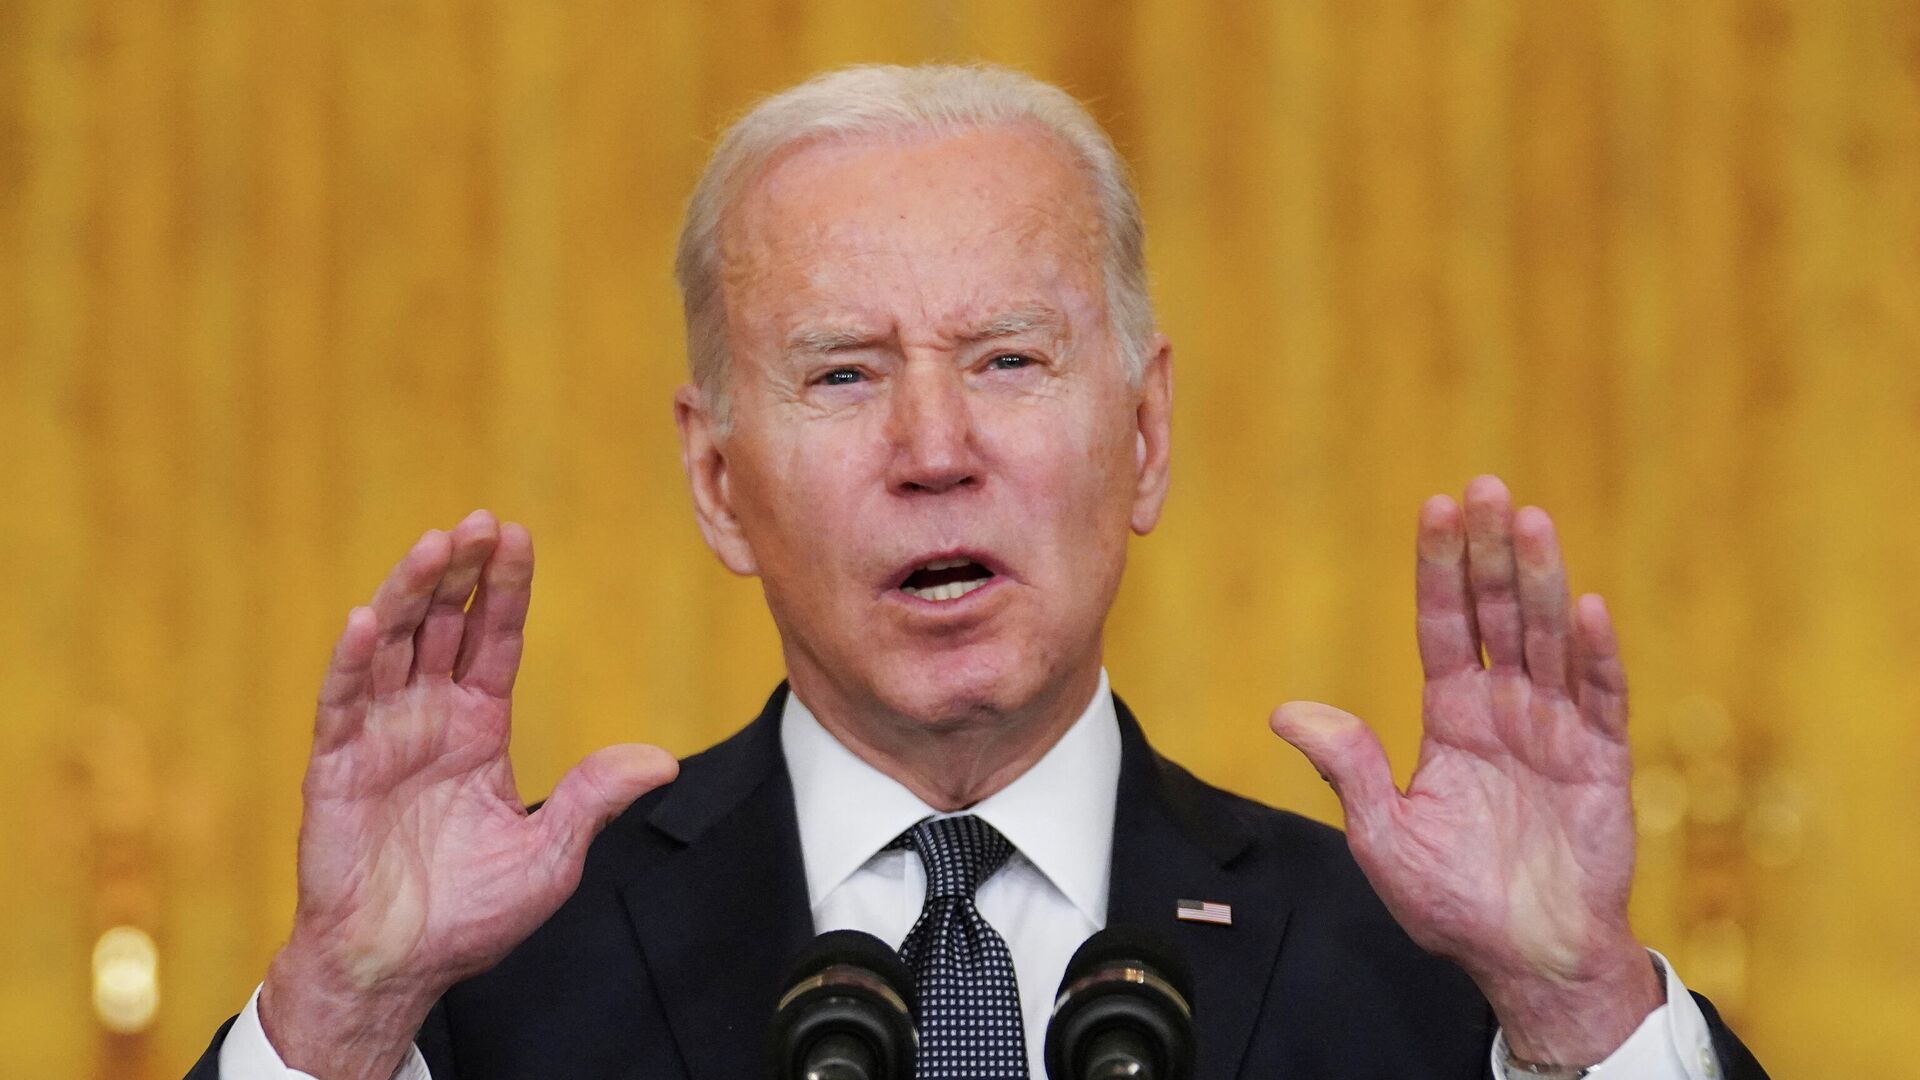 U.S. President Joe Biden gestures as he speaks about the situation in Russia and Ukraine from the White House in Washington, U.S., February 15, 2022. - Sputnik International, 1920, 19.02.2022